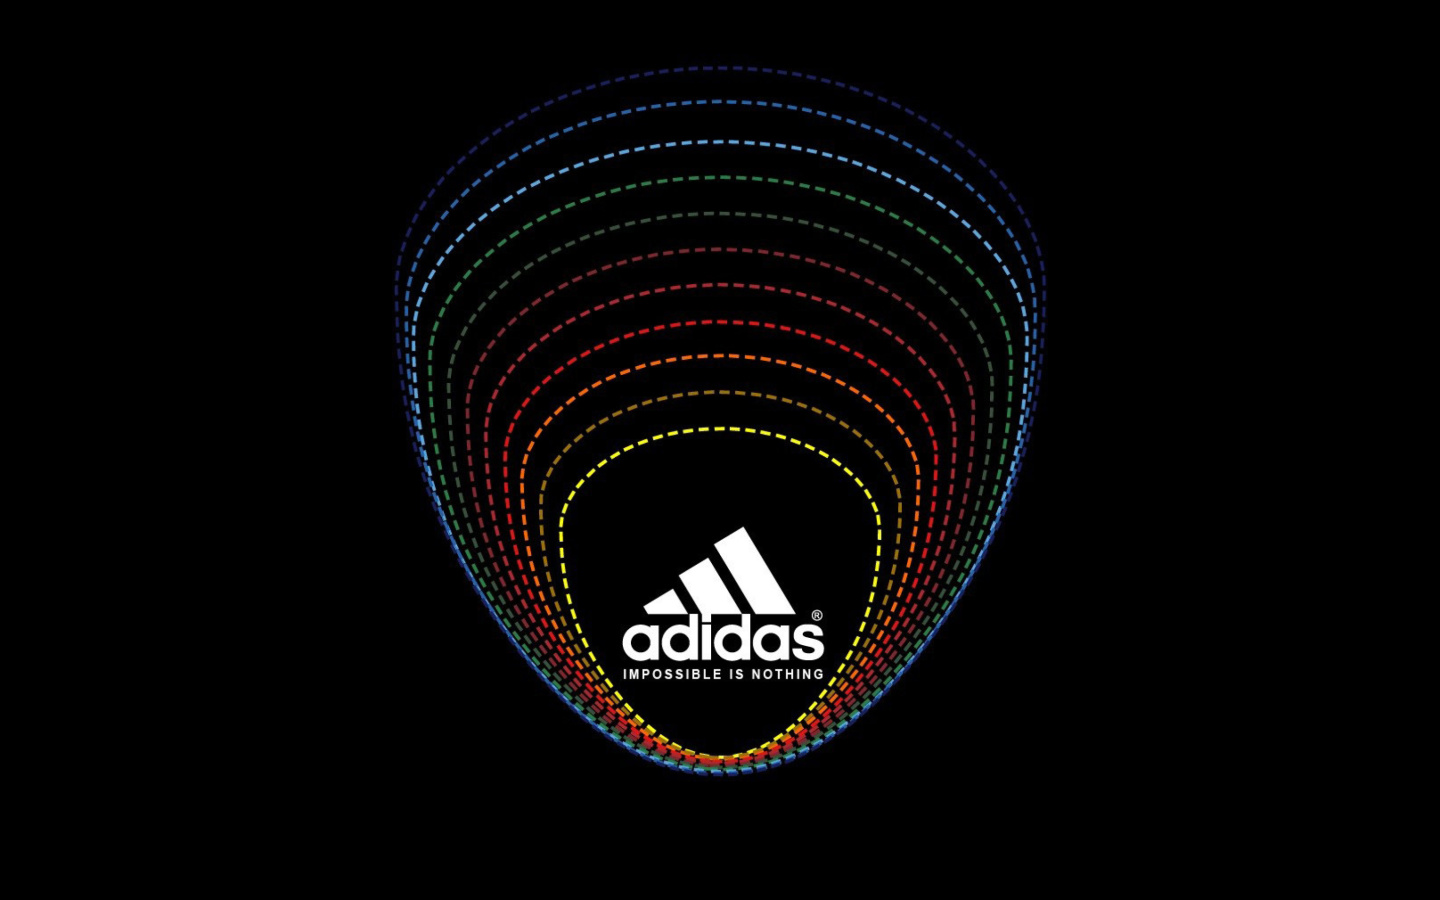 Das Adidas Tagline, Impossible is Nothing Wallpaper 1440x900